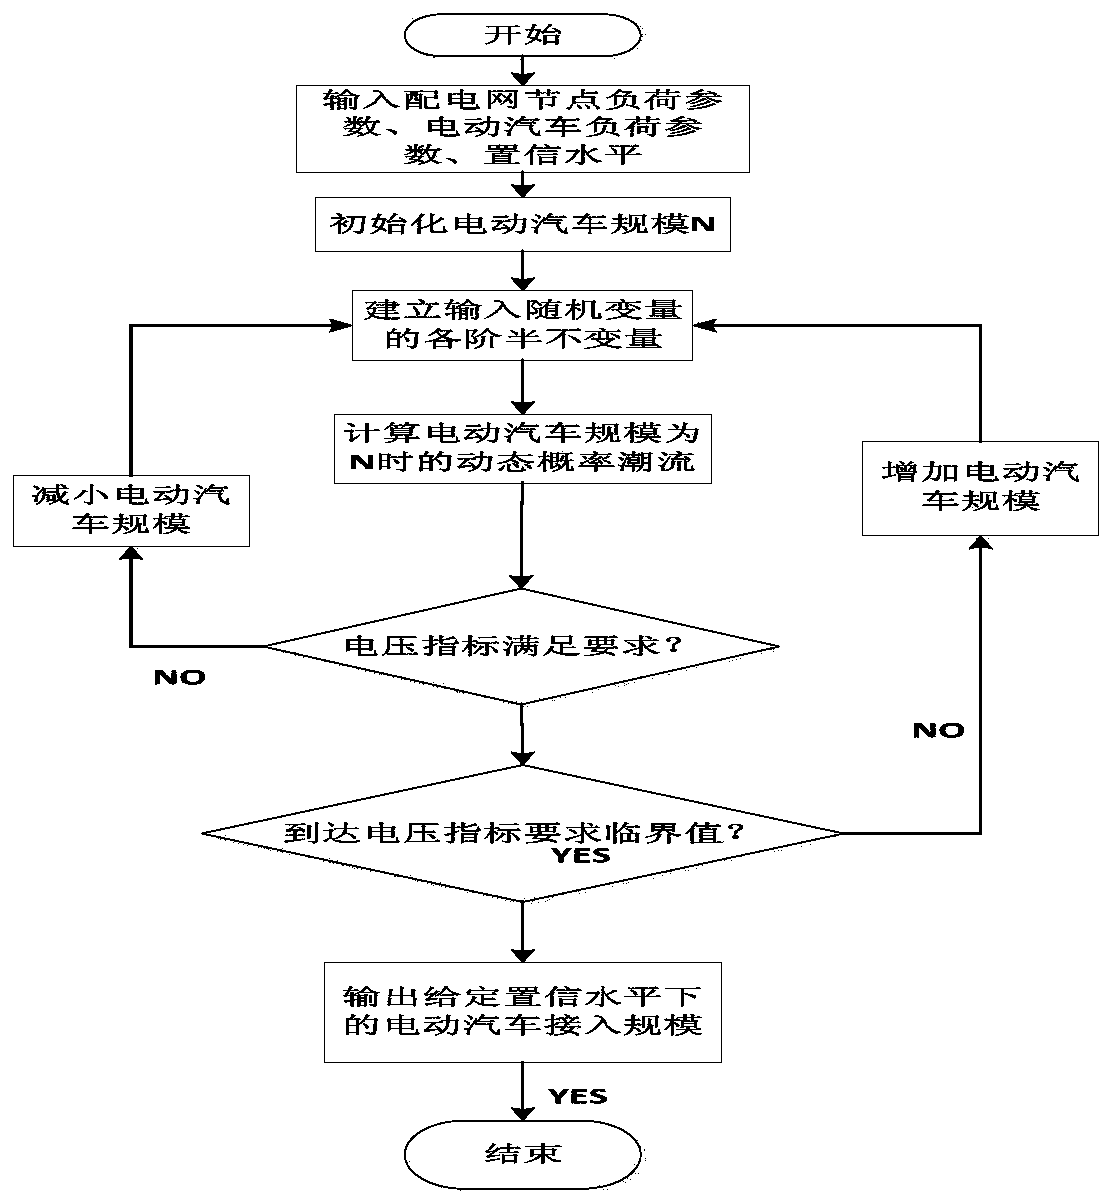 A probability method for quantitative evaluation of electric vehicle acceptance capability of a power distribution network